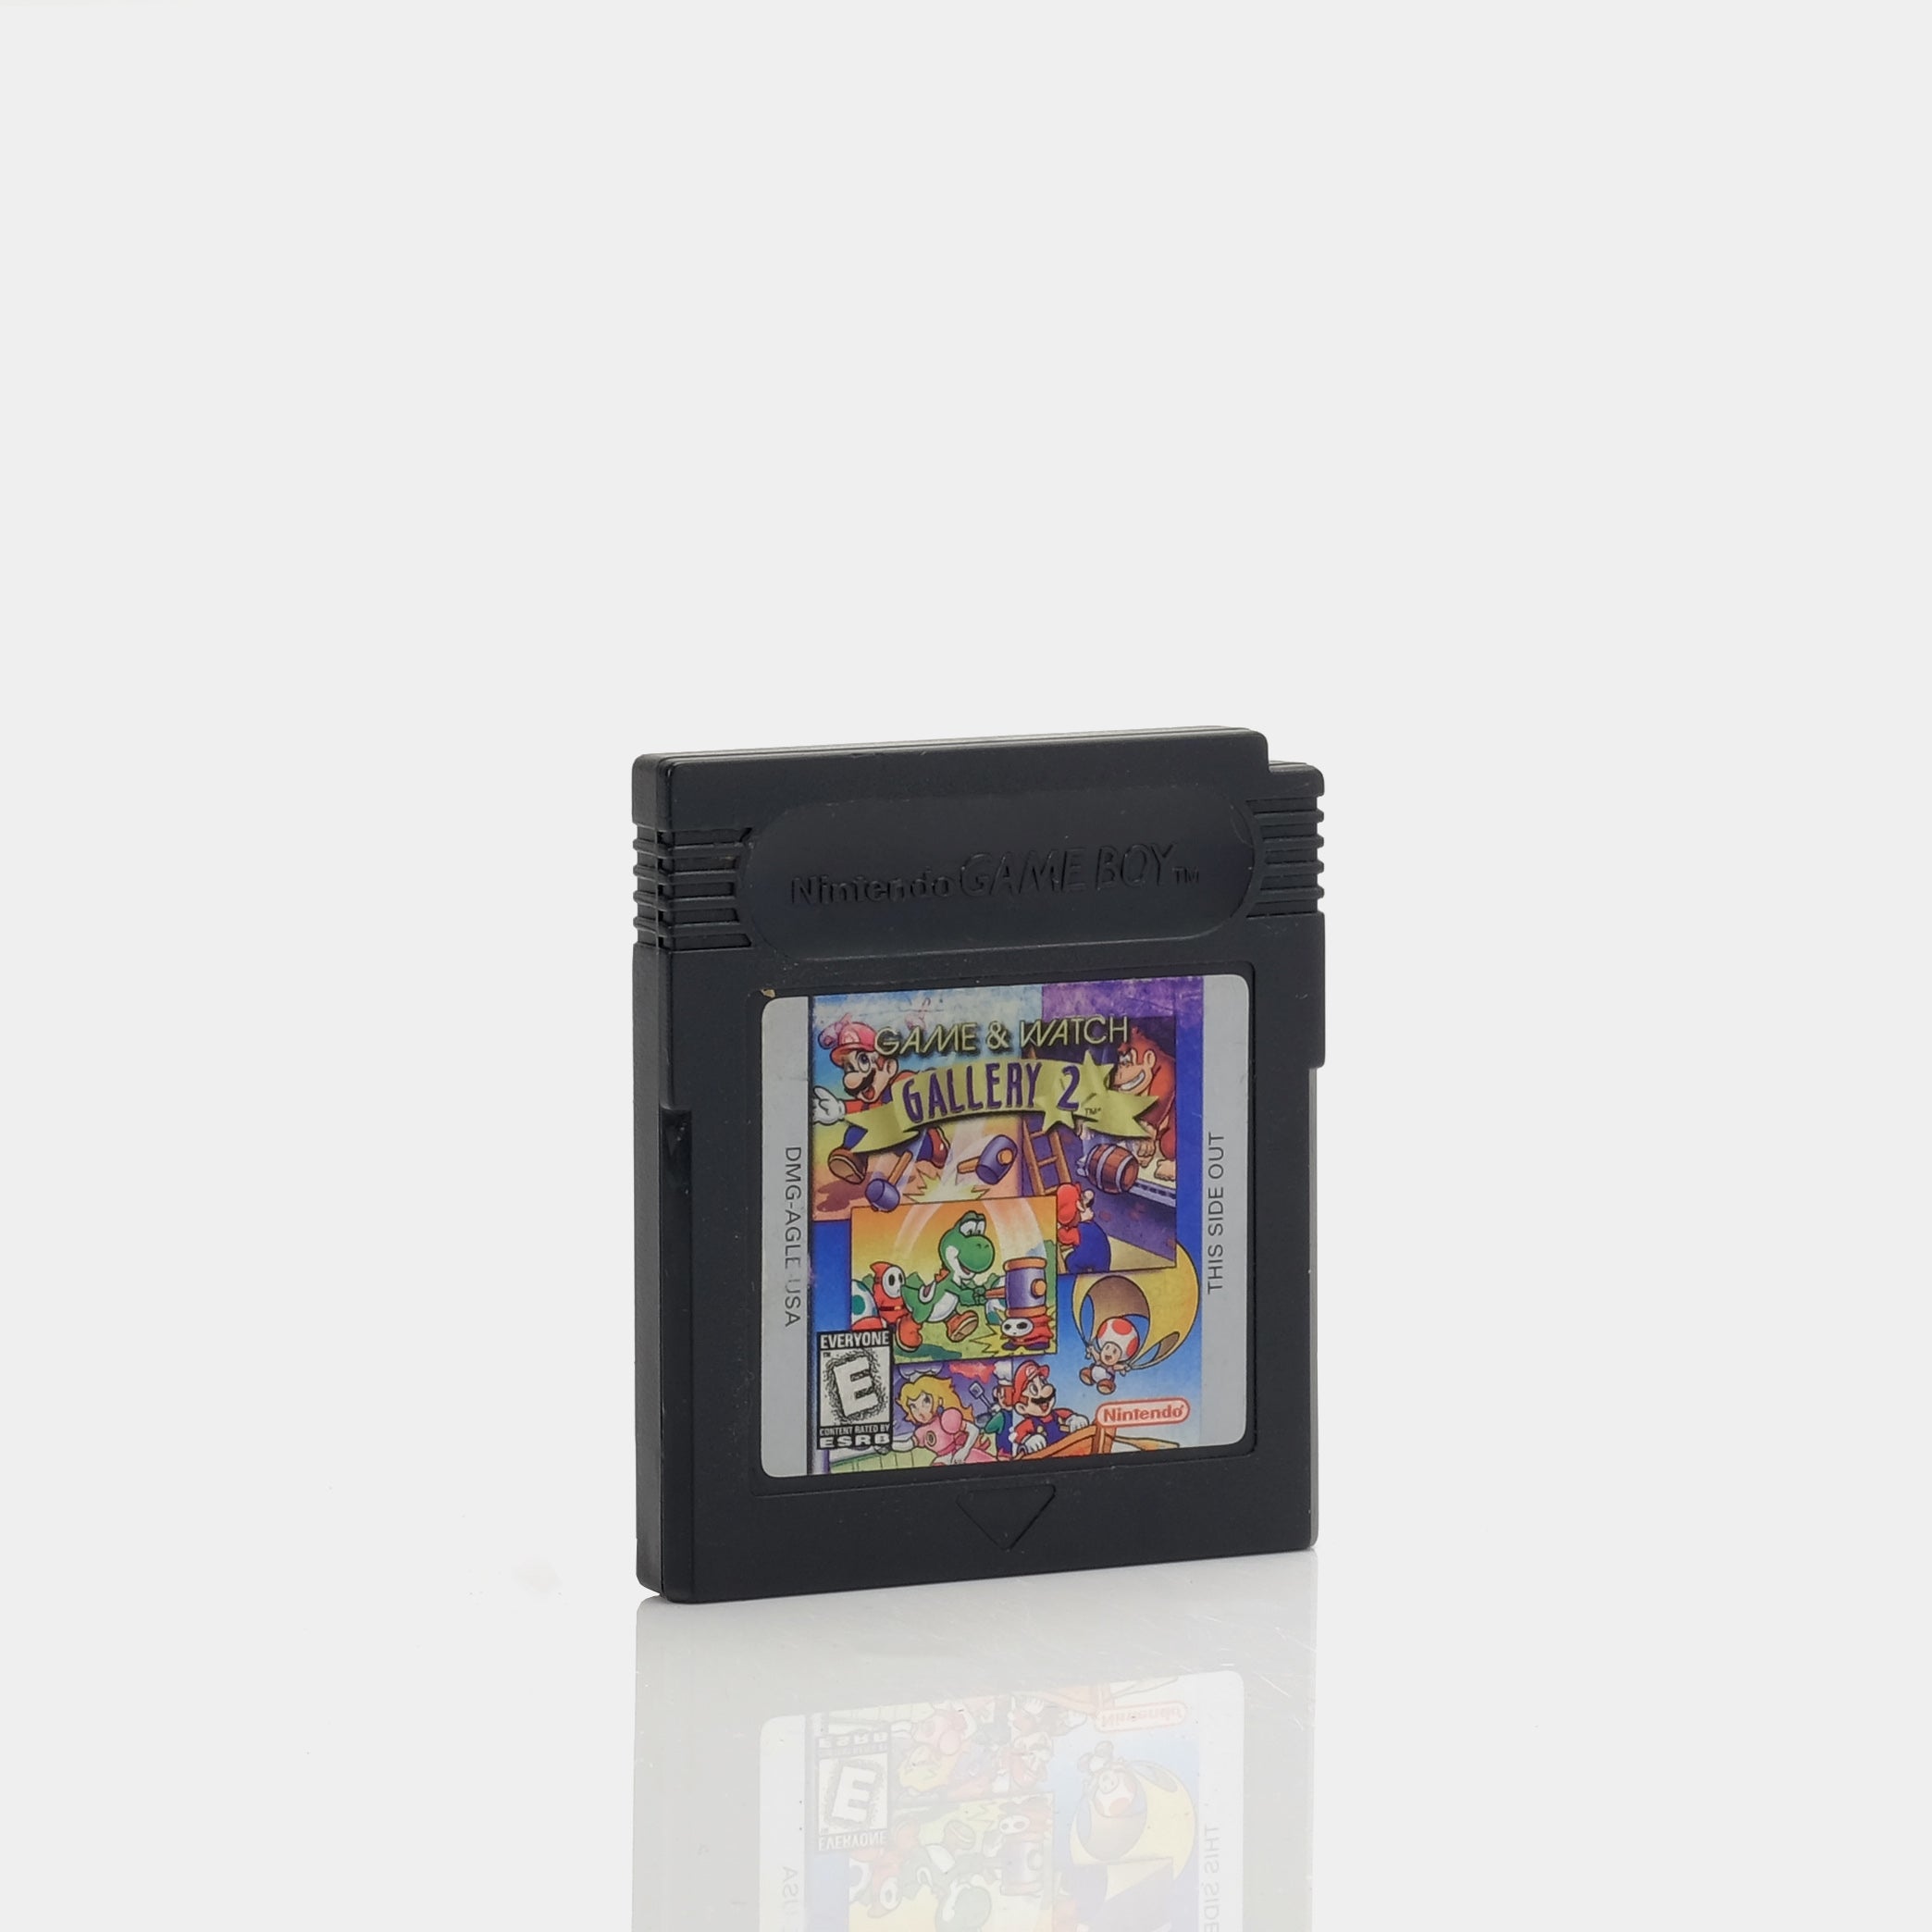 Game & Watch Gallery 2 Game Boy Game